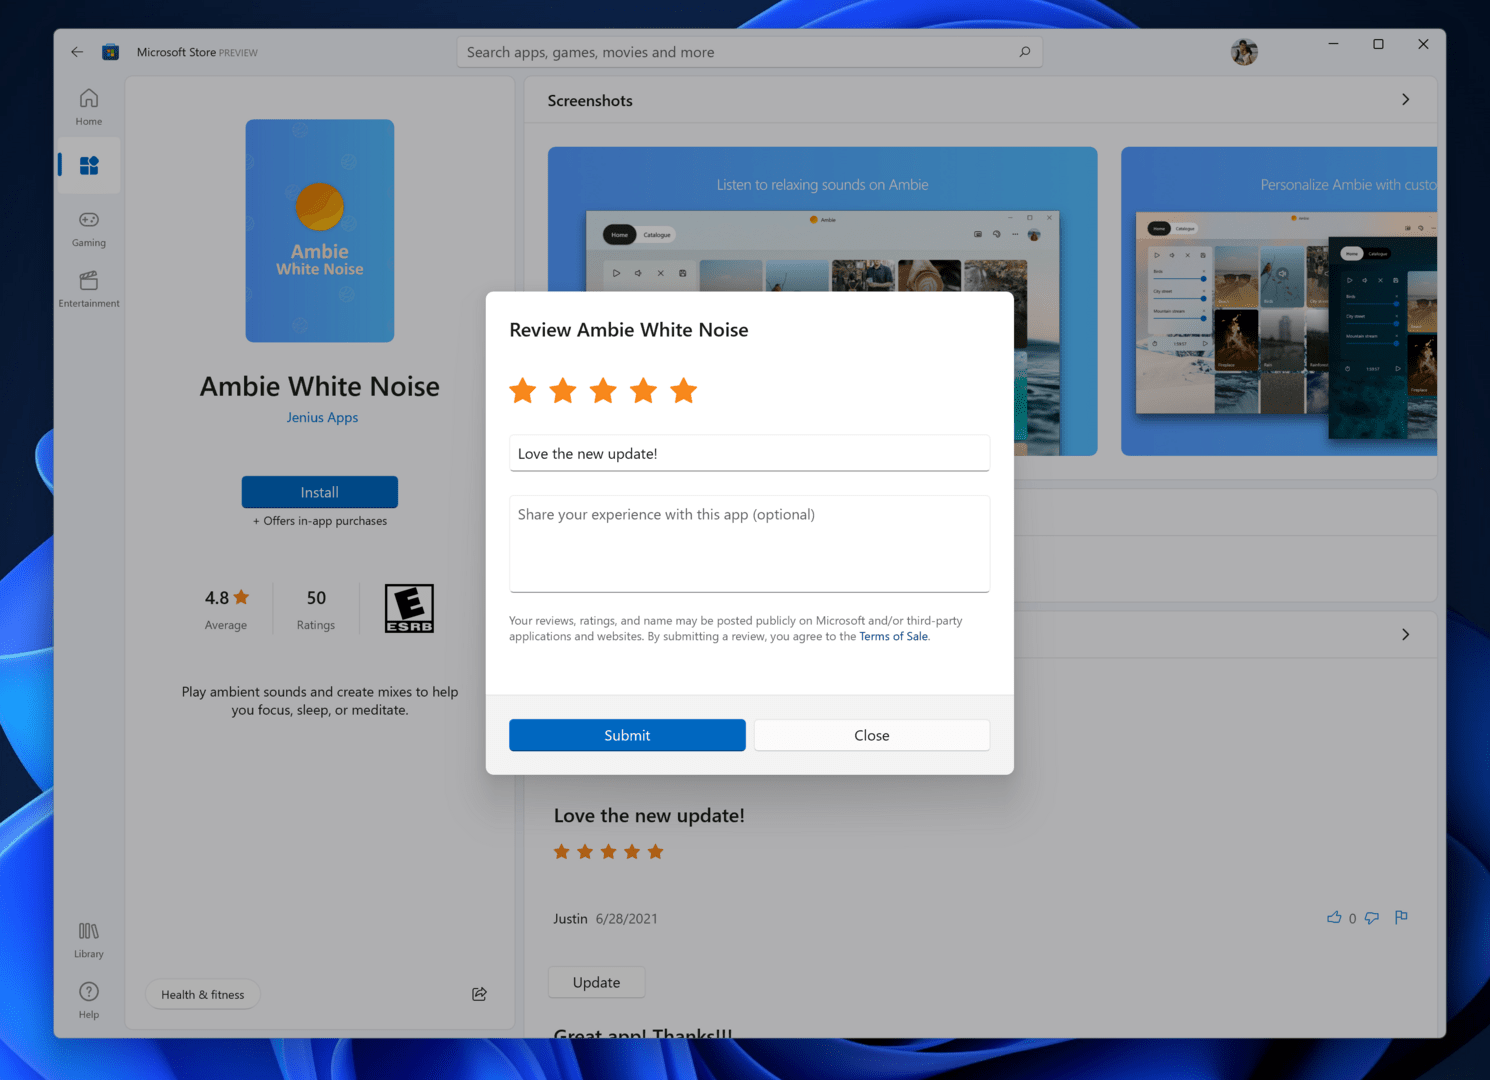 Microsoft Store Preview: Rating and Review